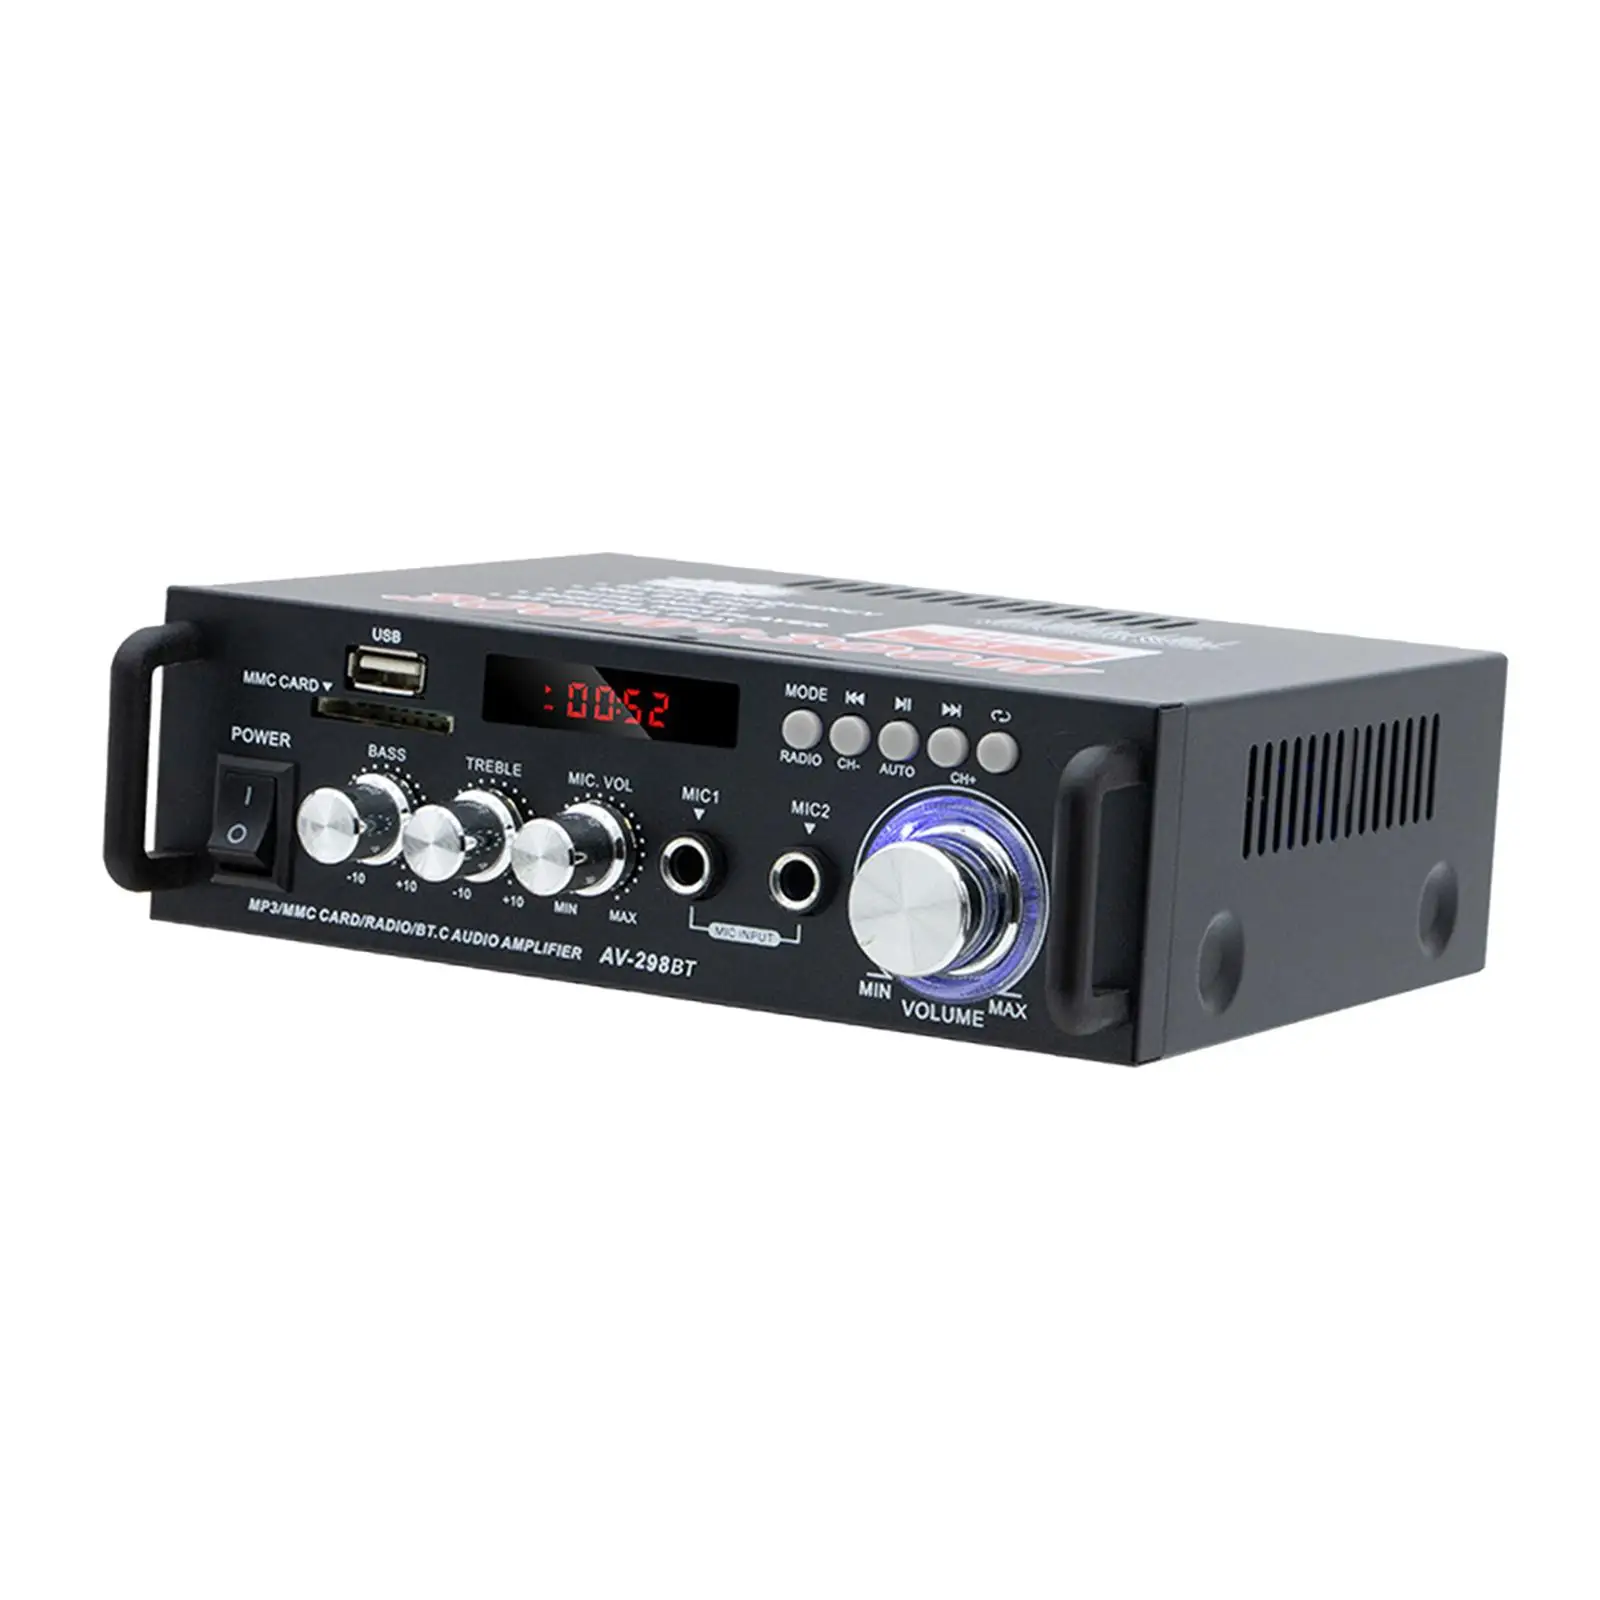 Stereo Power Amplifier Euadapter Plug Volume Control Integrated Amplifier 120W Channel for Speakers TV Computers Home Use Studio